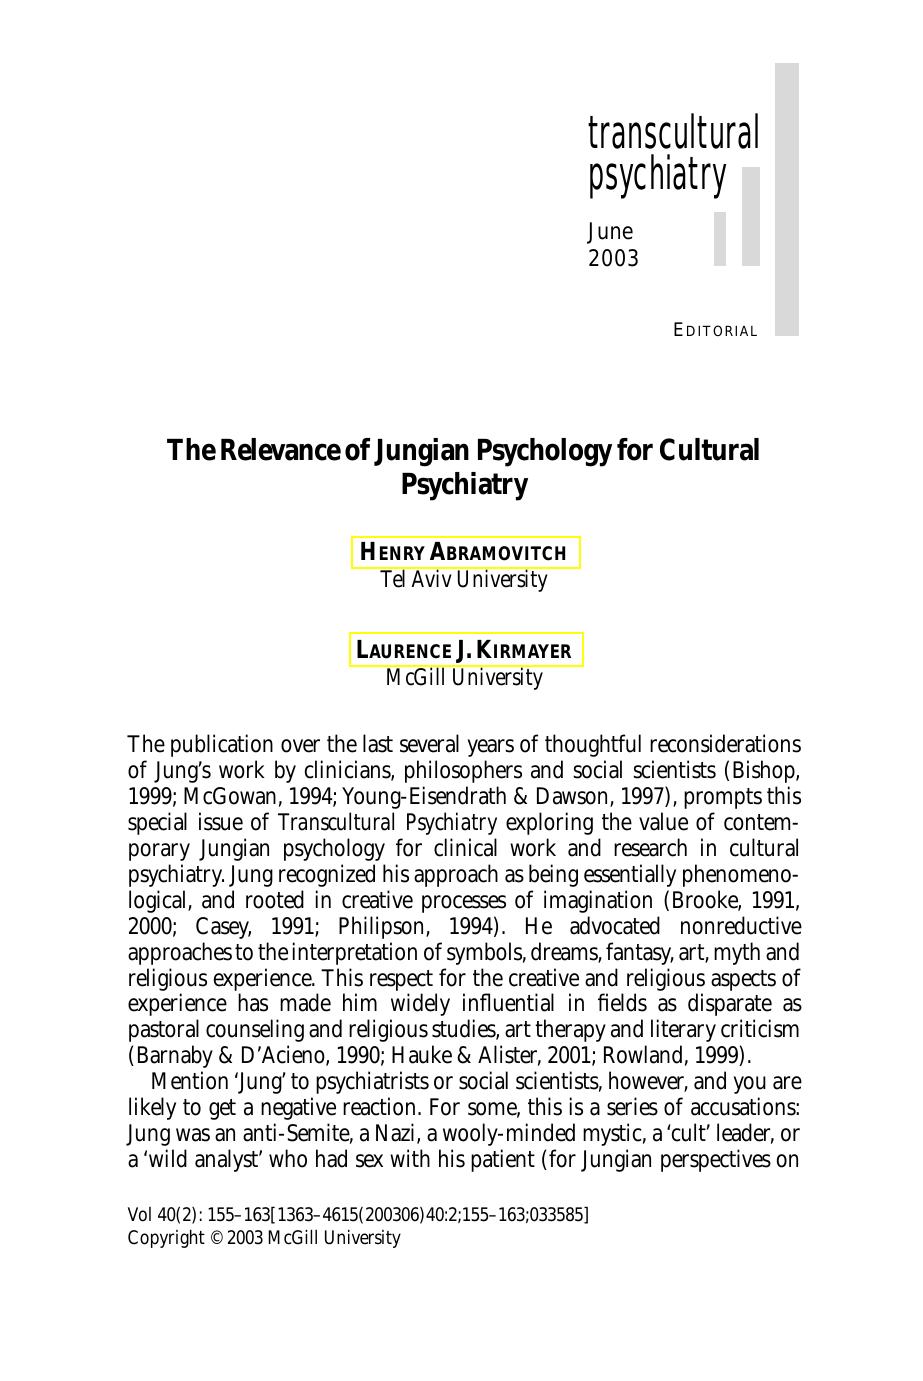 The Relevance of Jungian psychology for Cultural Psychiatry - Article